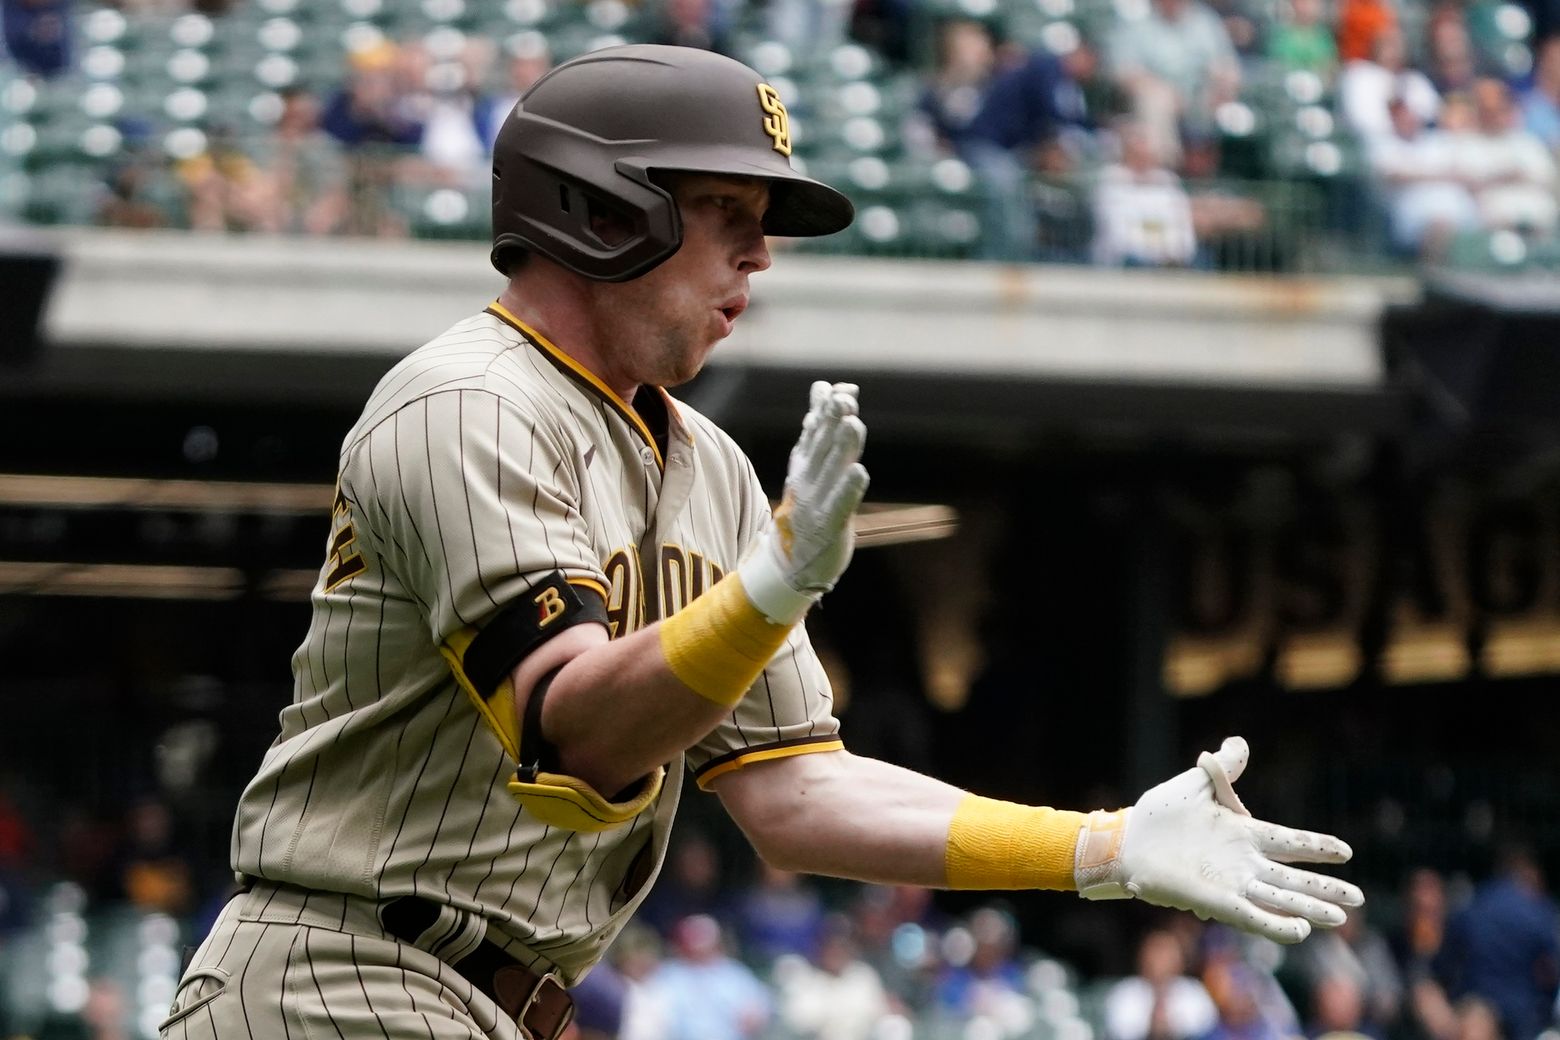 Cronenworth's HR in 10th sends Padres past Brewers 6-4